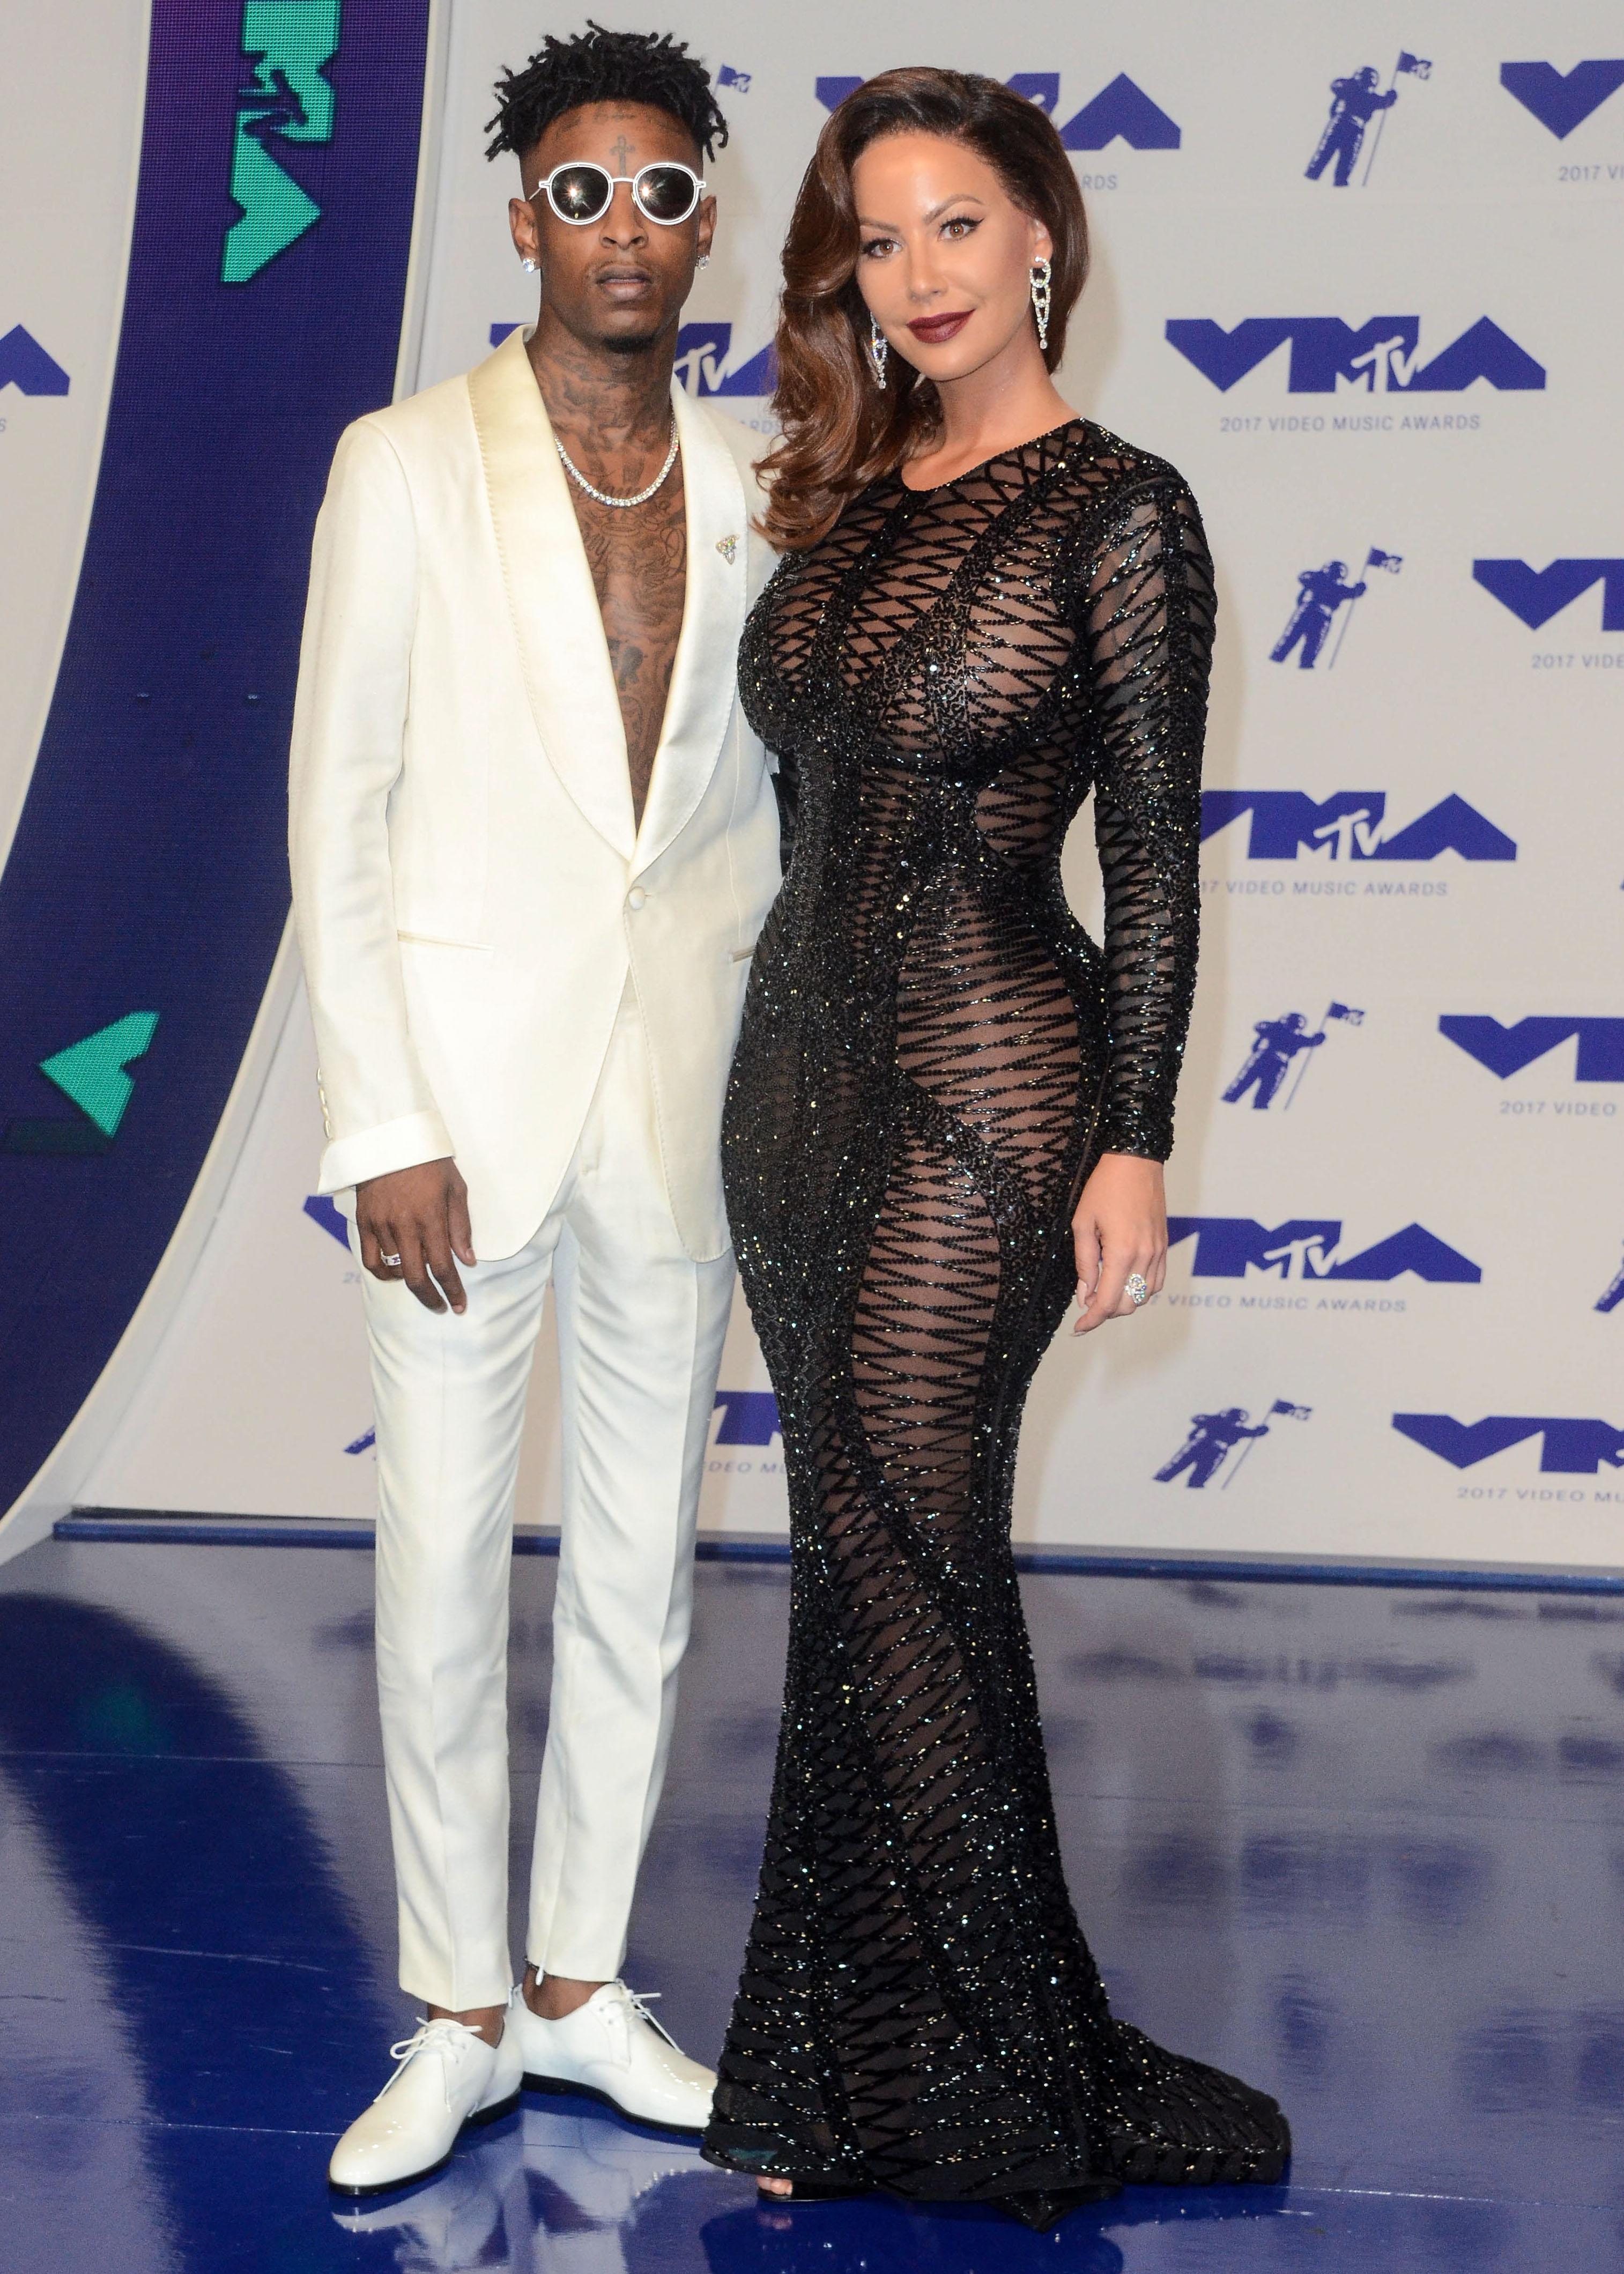 Amber Rose puts on a sizzling show for new beau 21 Savage